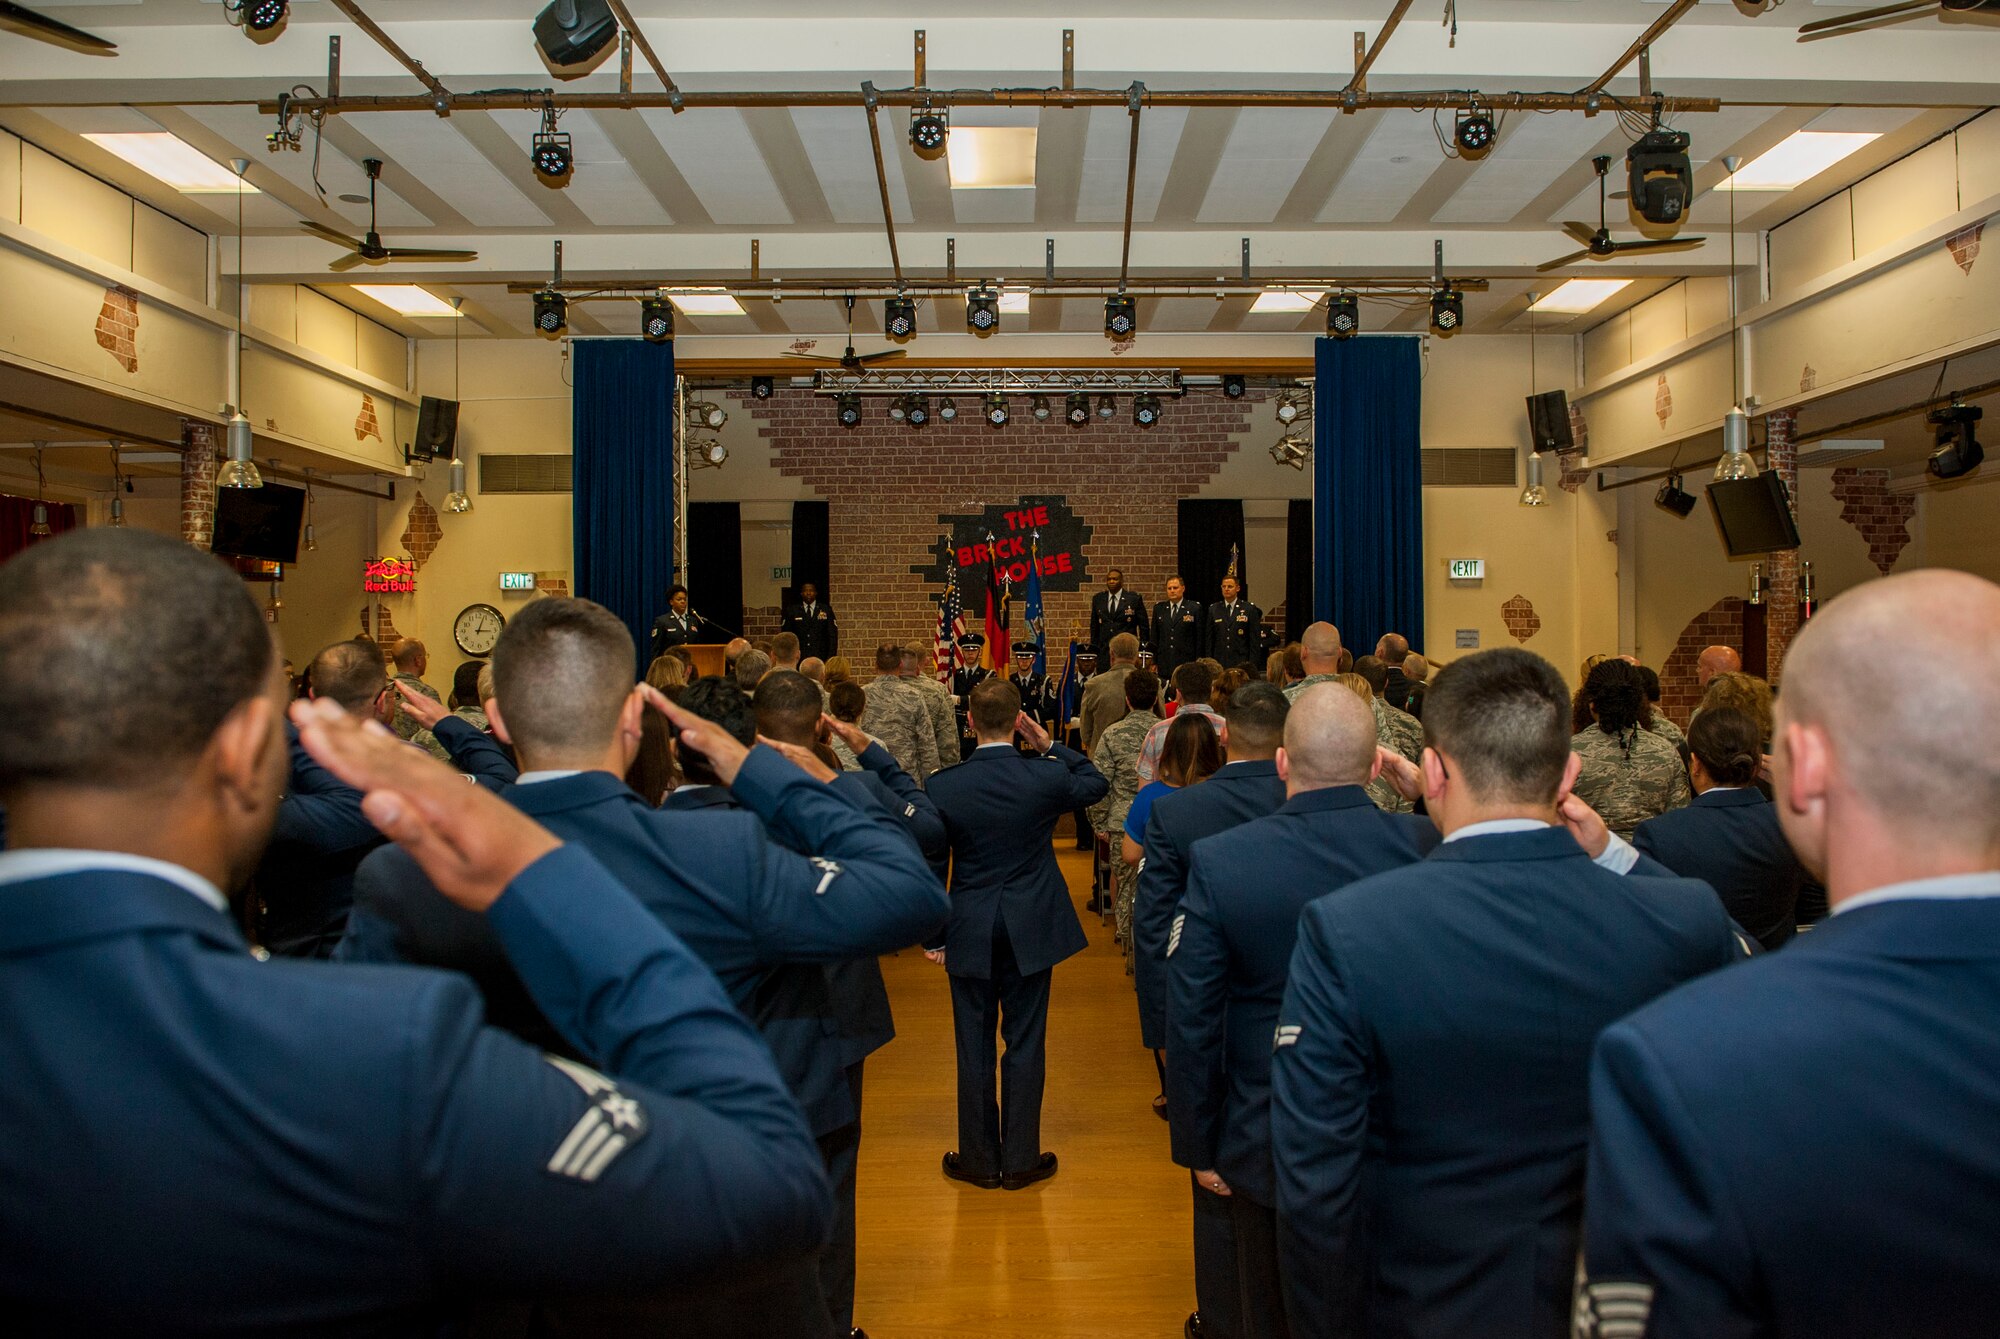 Members of the 52nd Medical Support Squadron salute in formation during the 52nd MDSS change of command ceremony in the Brickhouse on Spangdahlem Air Base, Germany, June 30, 2016. Family and friends of both the outgoing and incoming 52nd MDSS commanders of the attended the ceremony. (U.S. Air Force photo by Airman 1st Class Timothy Kim/Released)